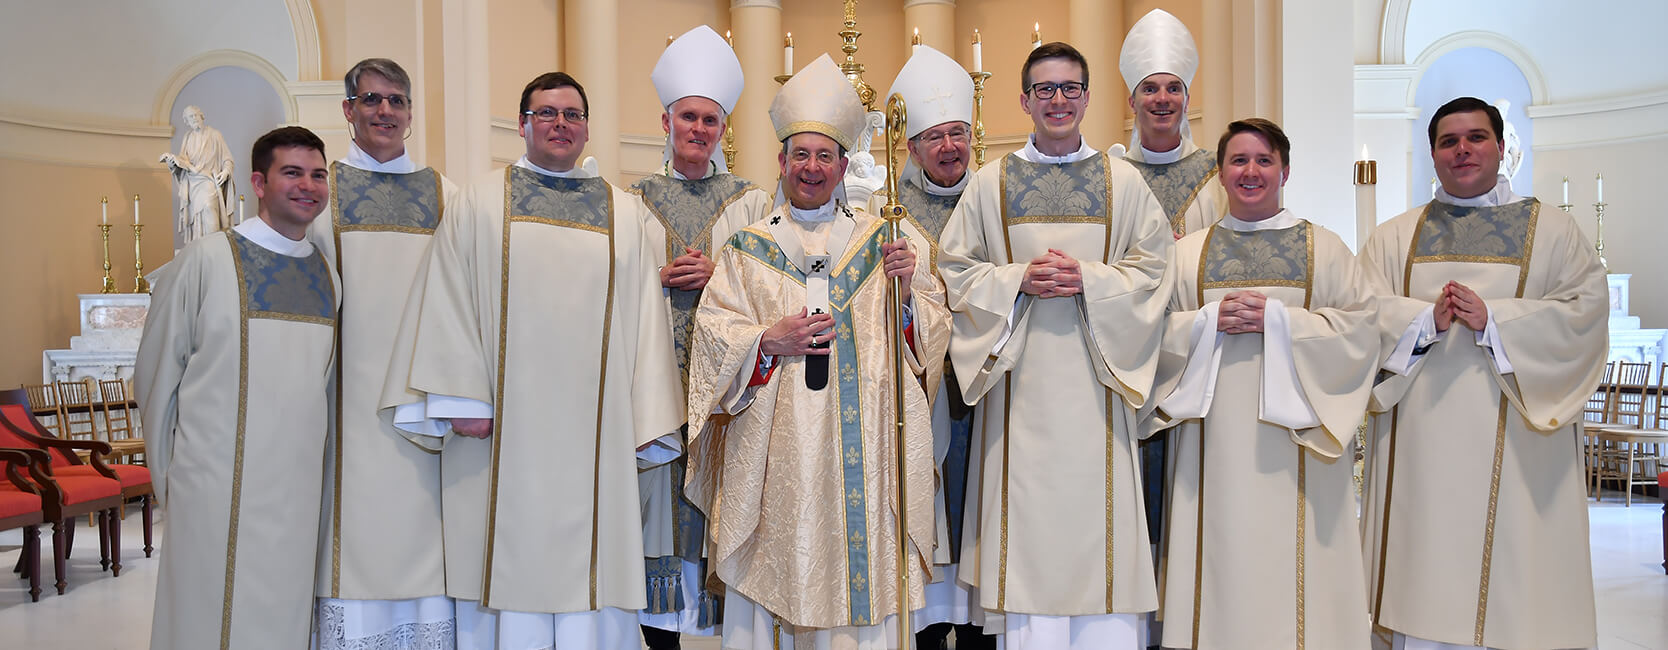 Baltimore Archdiocese welcomes six new deacons